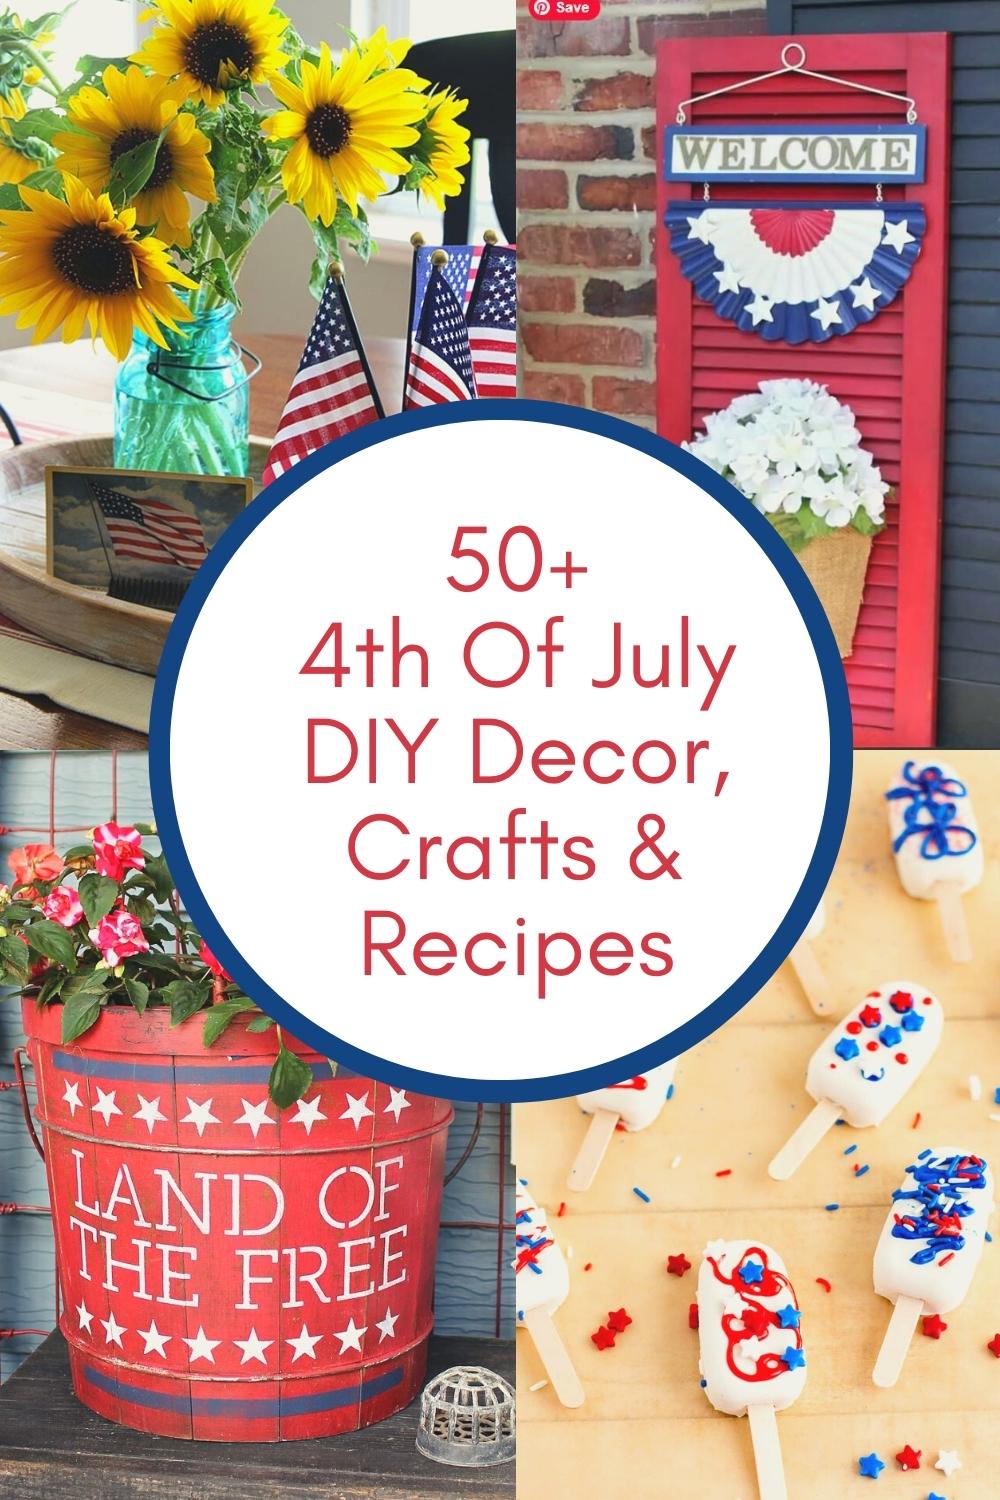 Over 50 4th Of July crafts, DIY home decor projects and recipes! 